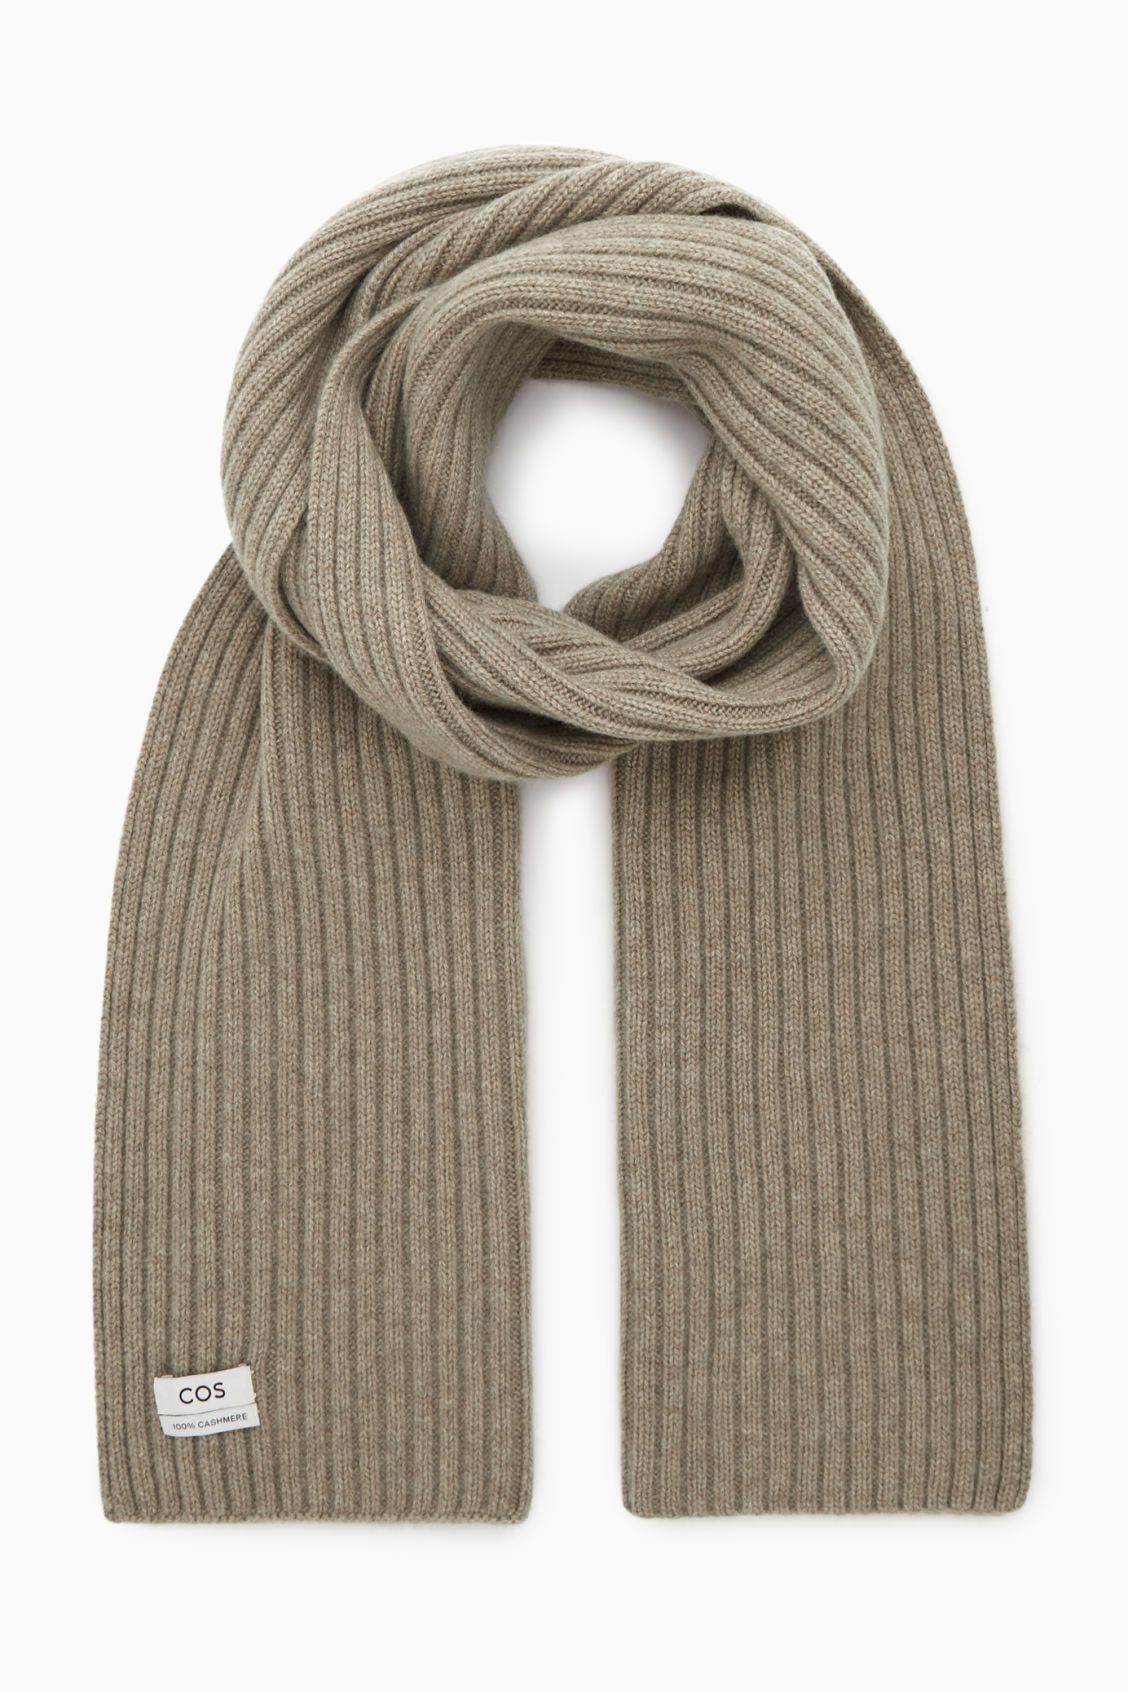 CHUNKY RIBBED-KNIT PURE CASHMERE SCARF - BEIGE - COS | COS UK